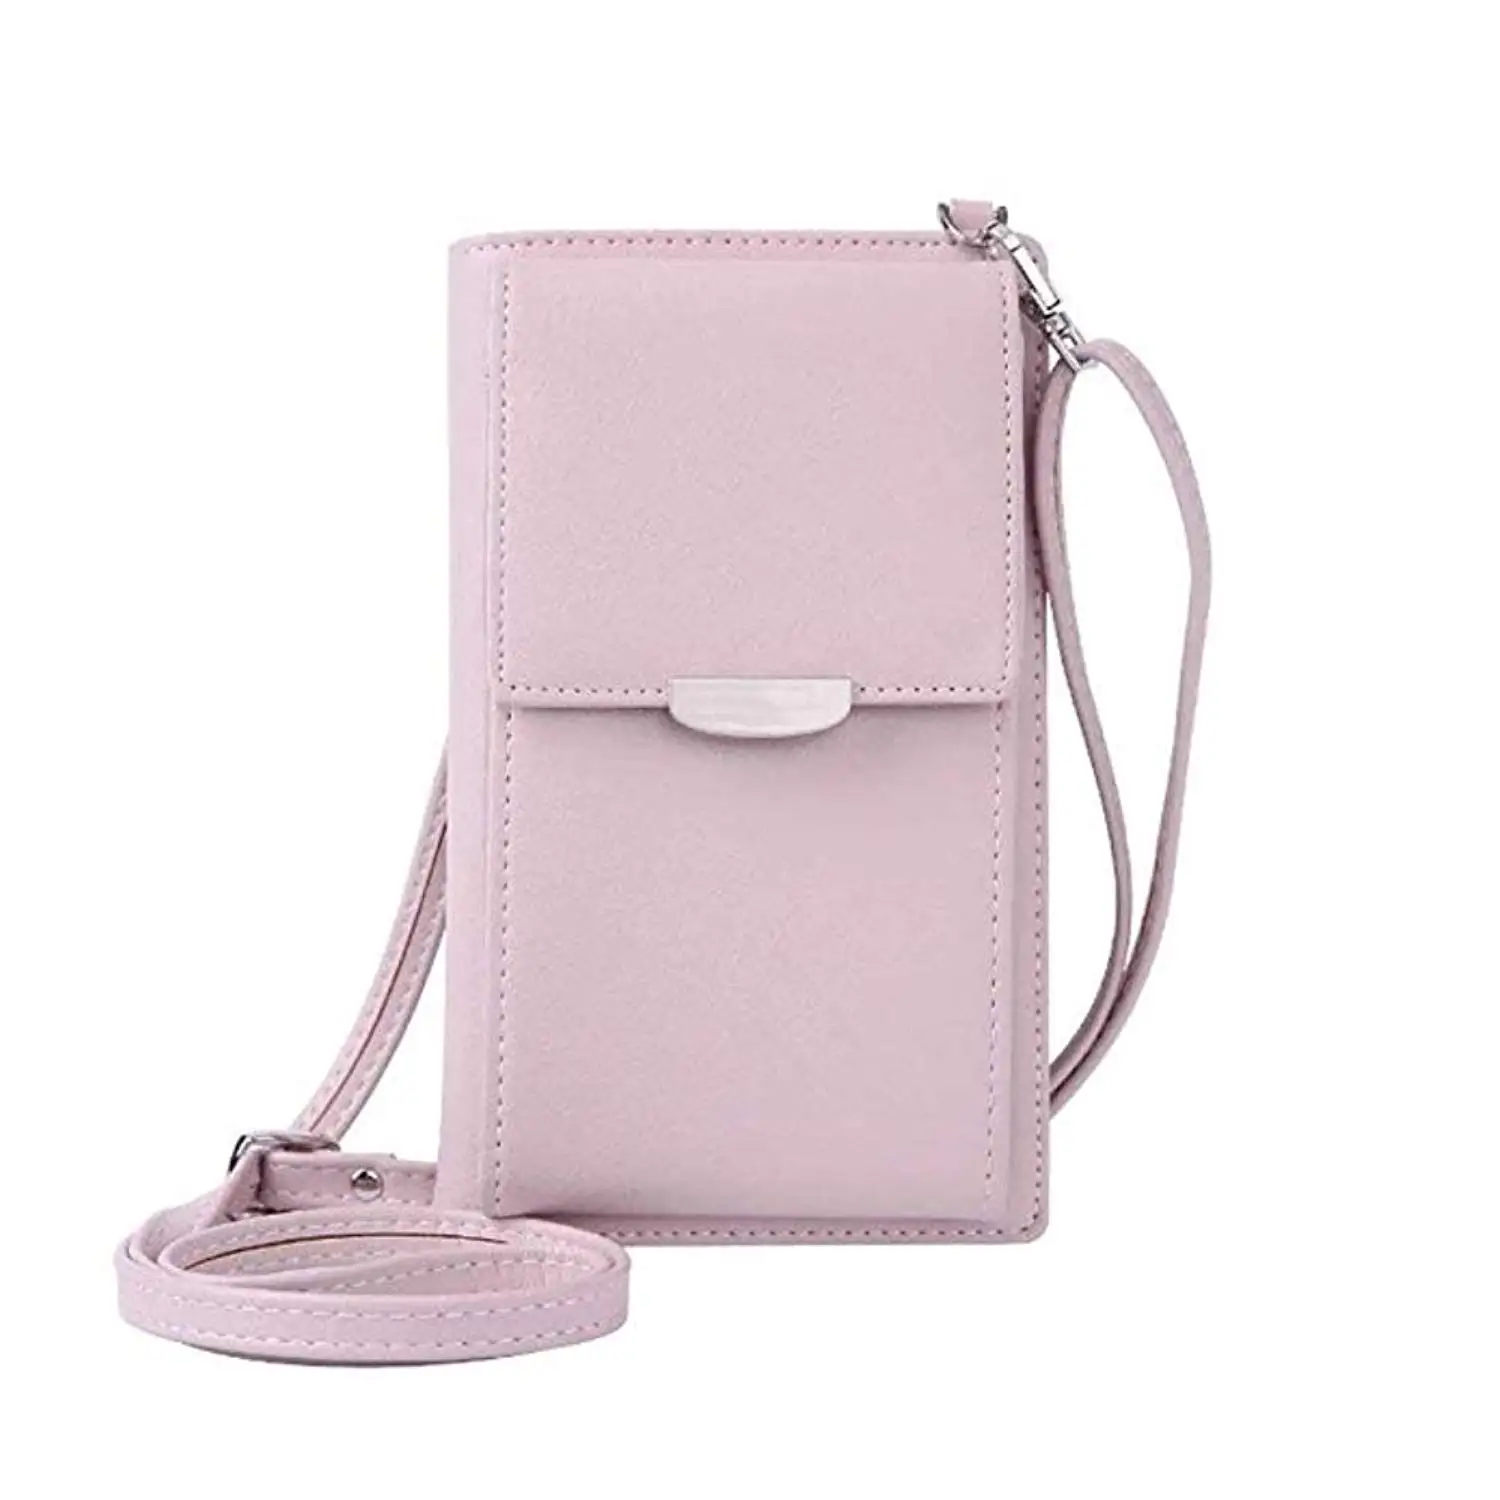 Buy Small Crossbody Bag Leather Cell Phone Bag Purse Wallet with strap for Women Girl in Cheap ...